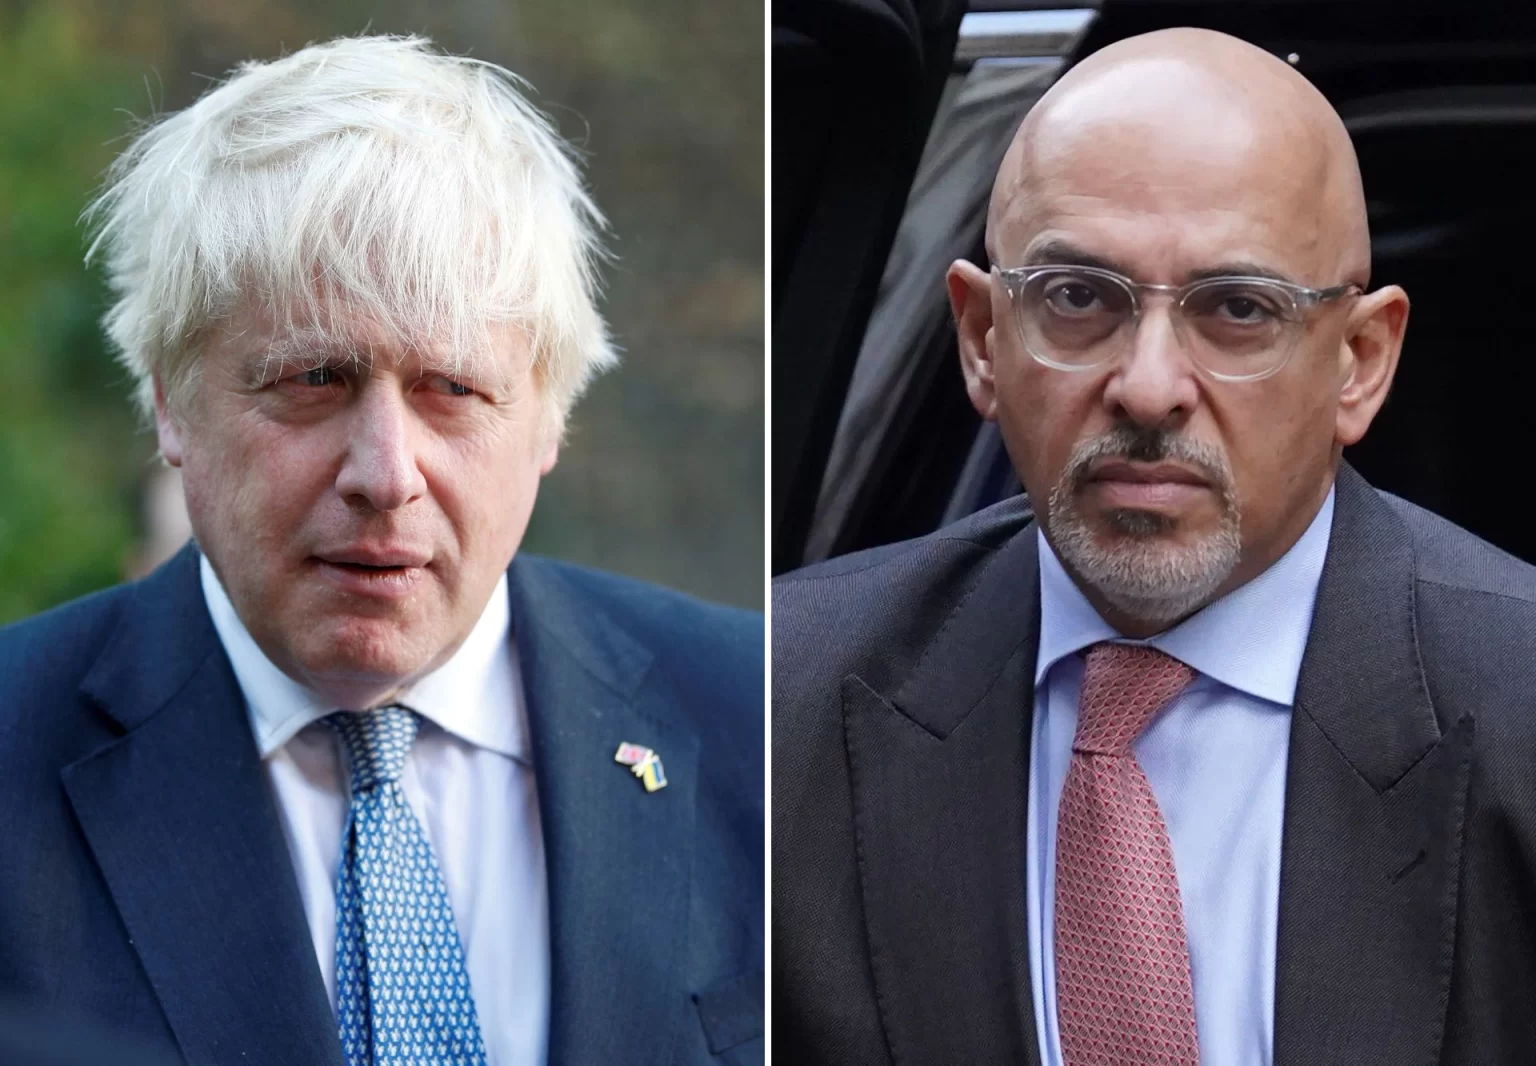 Tories face multiple sleaze probes after Boris Johnson hit by fresh claims over personal finances